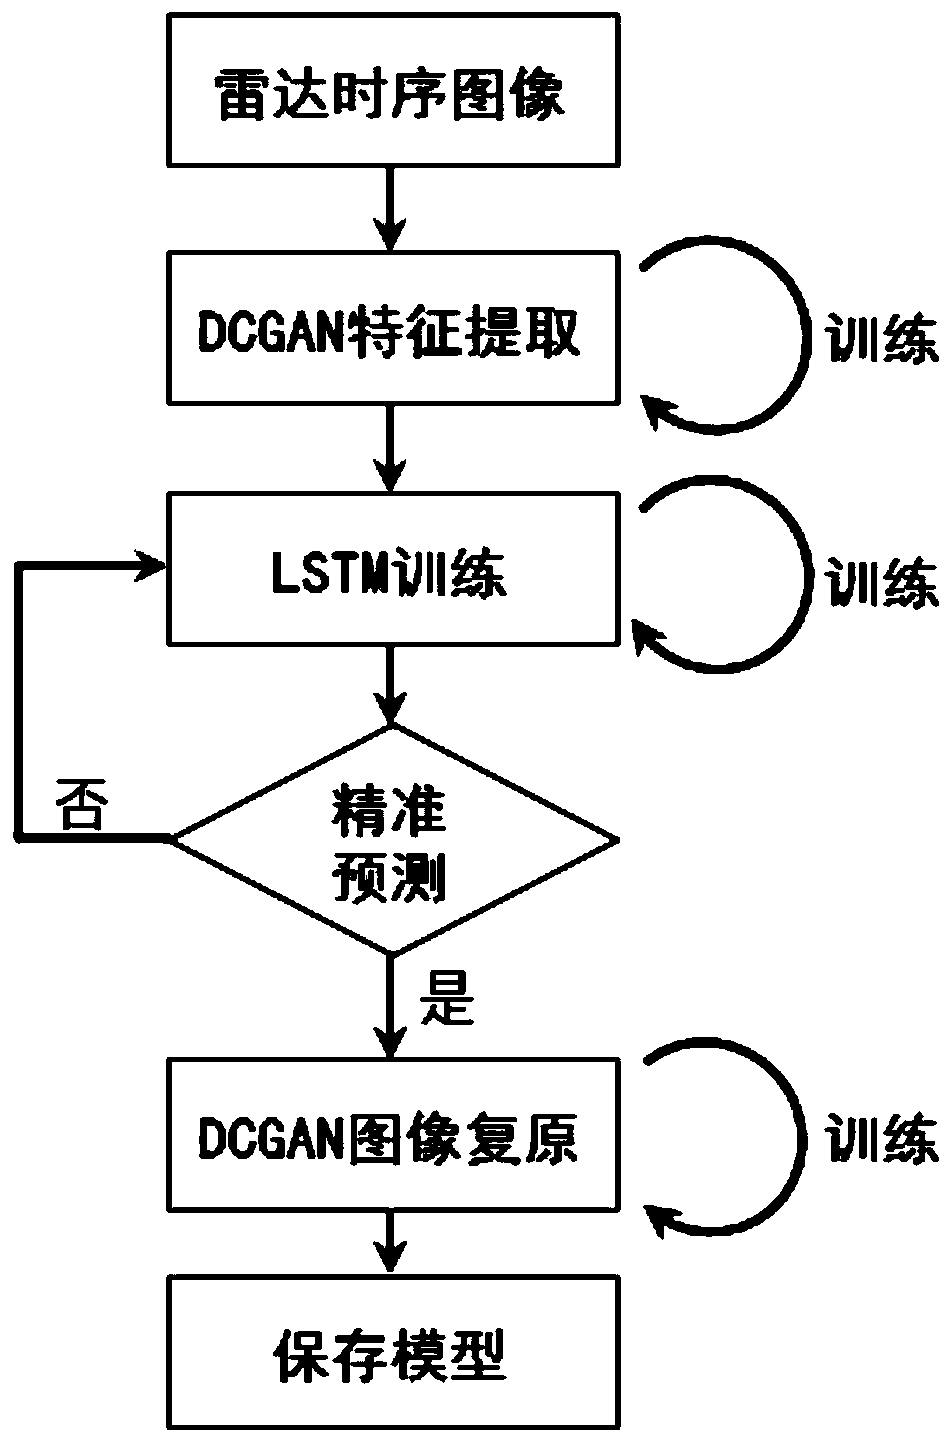 sequential image prediction method based on LSTM and DCGAN